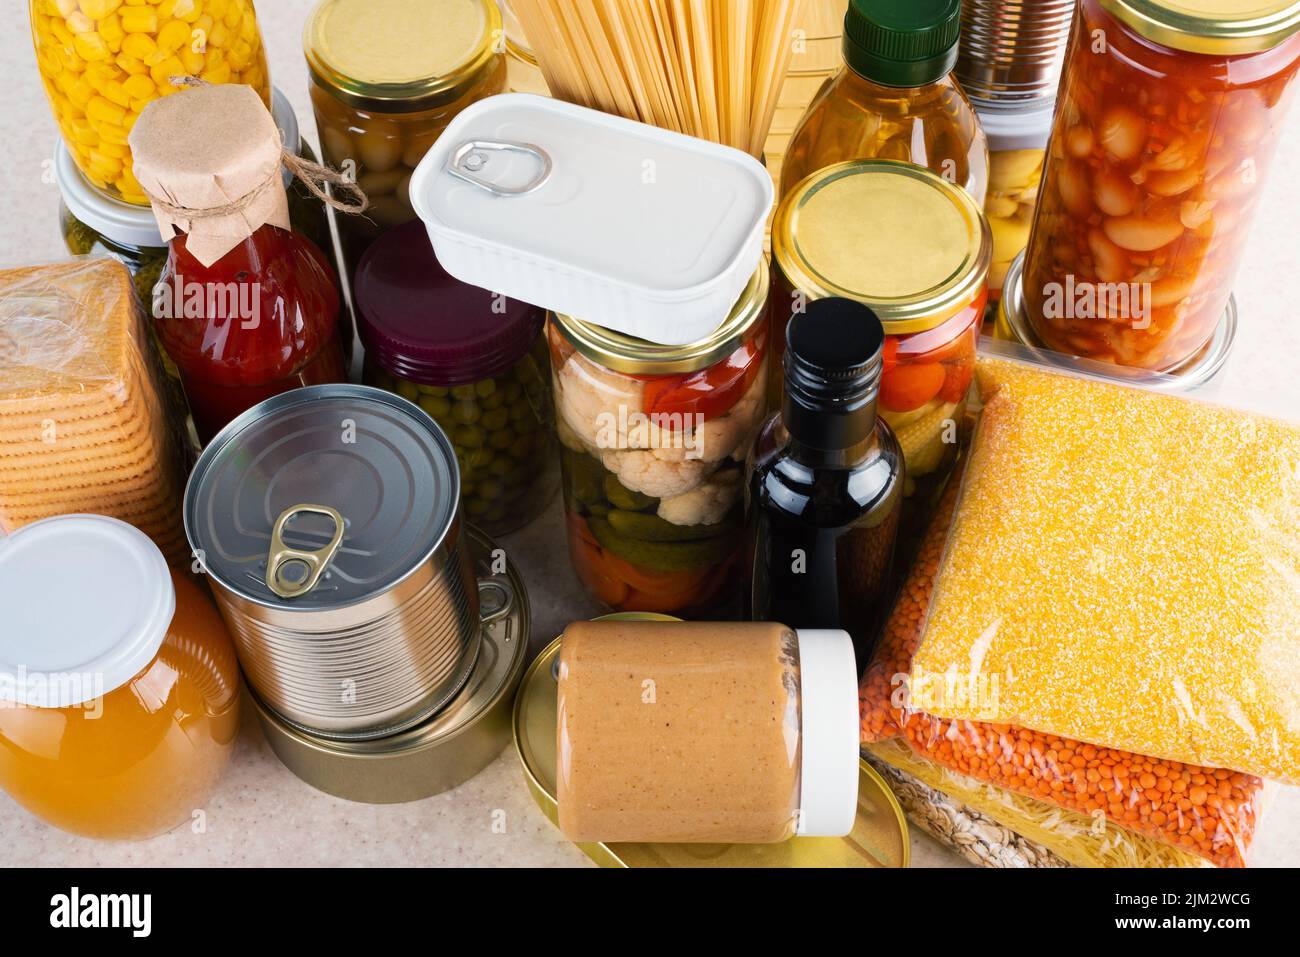 Emergency survival food set on white kitchen table high angle view Stock Photo